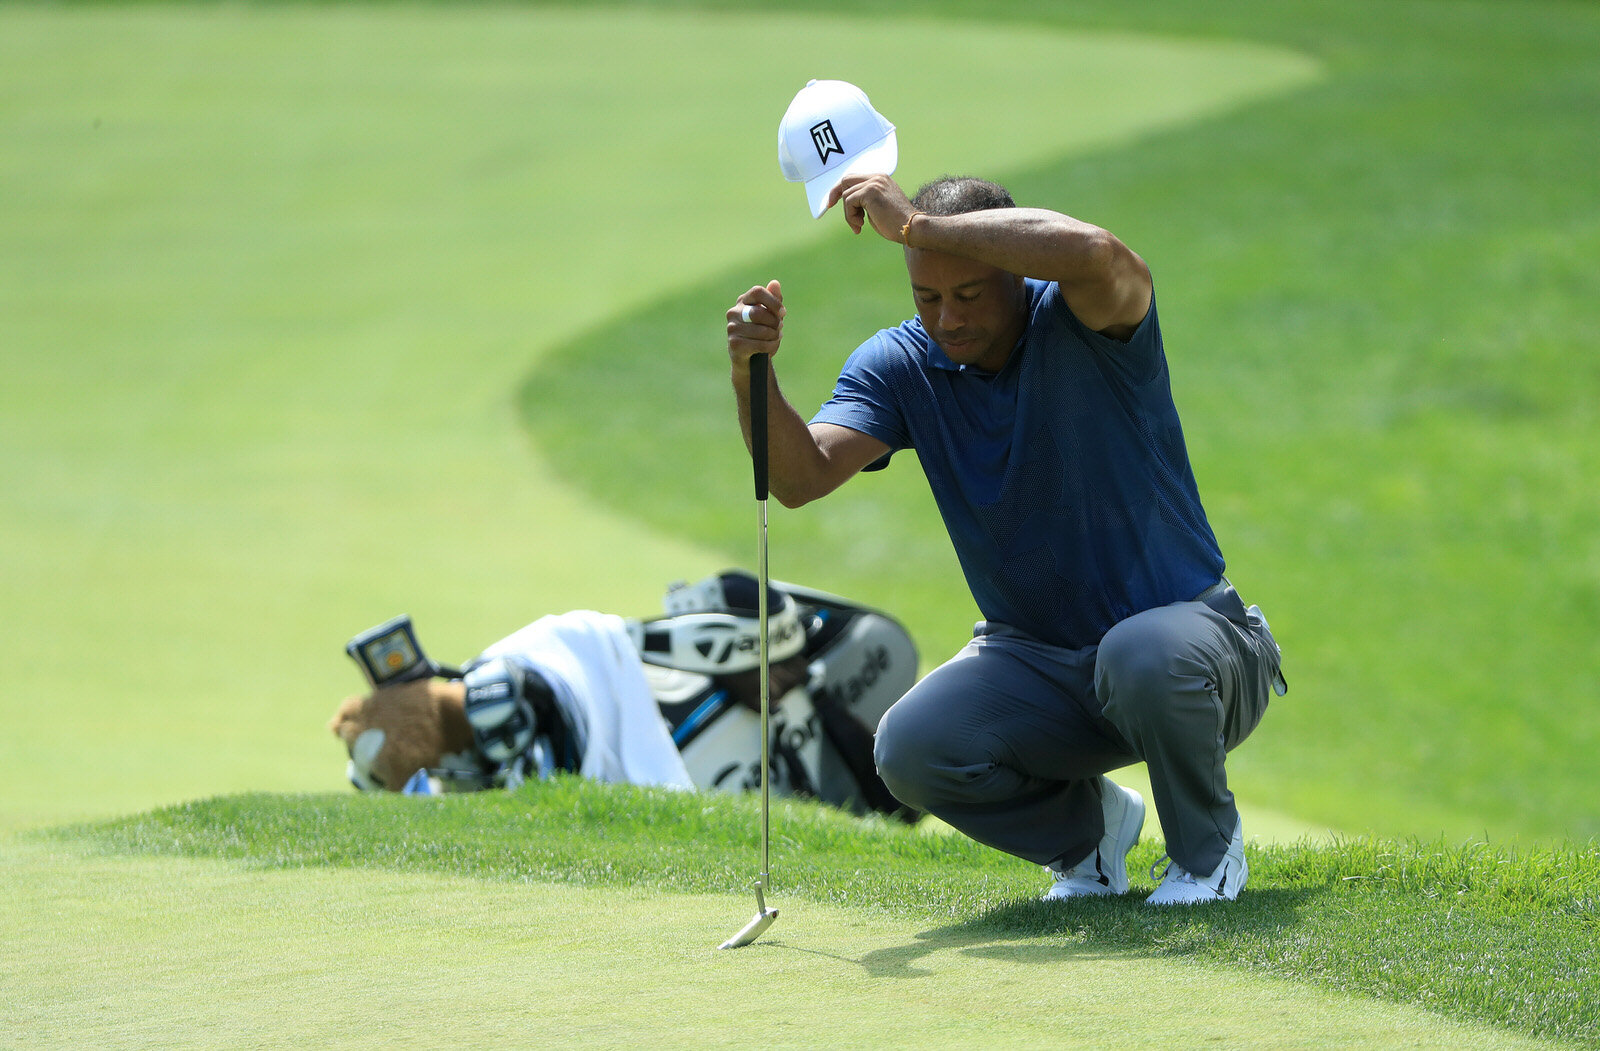  DUBLIN, OHIO - JULY 17: Tiger Woods of the United States wipes his forehead on the fourth green during the second round of The Memorial Tournament on July 17, 2020 at Muirfield Village Golf Club in Dublin, Ohio. (Photo by Sam Greenwood/Getty Images)